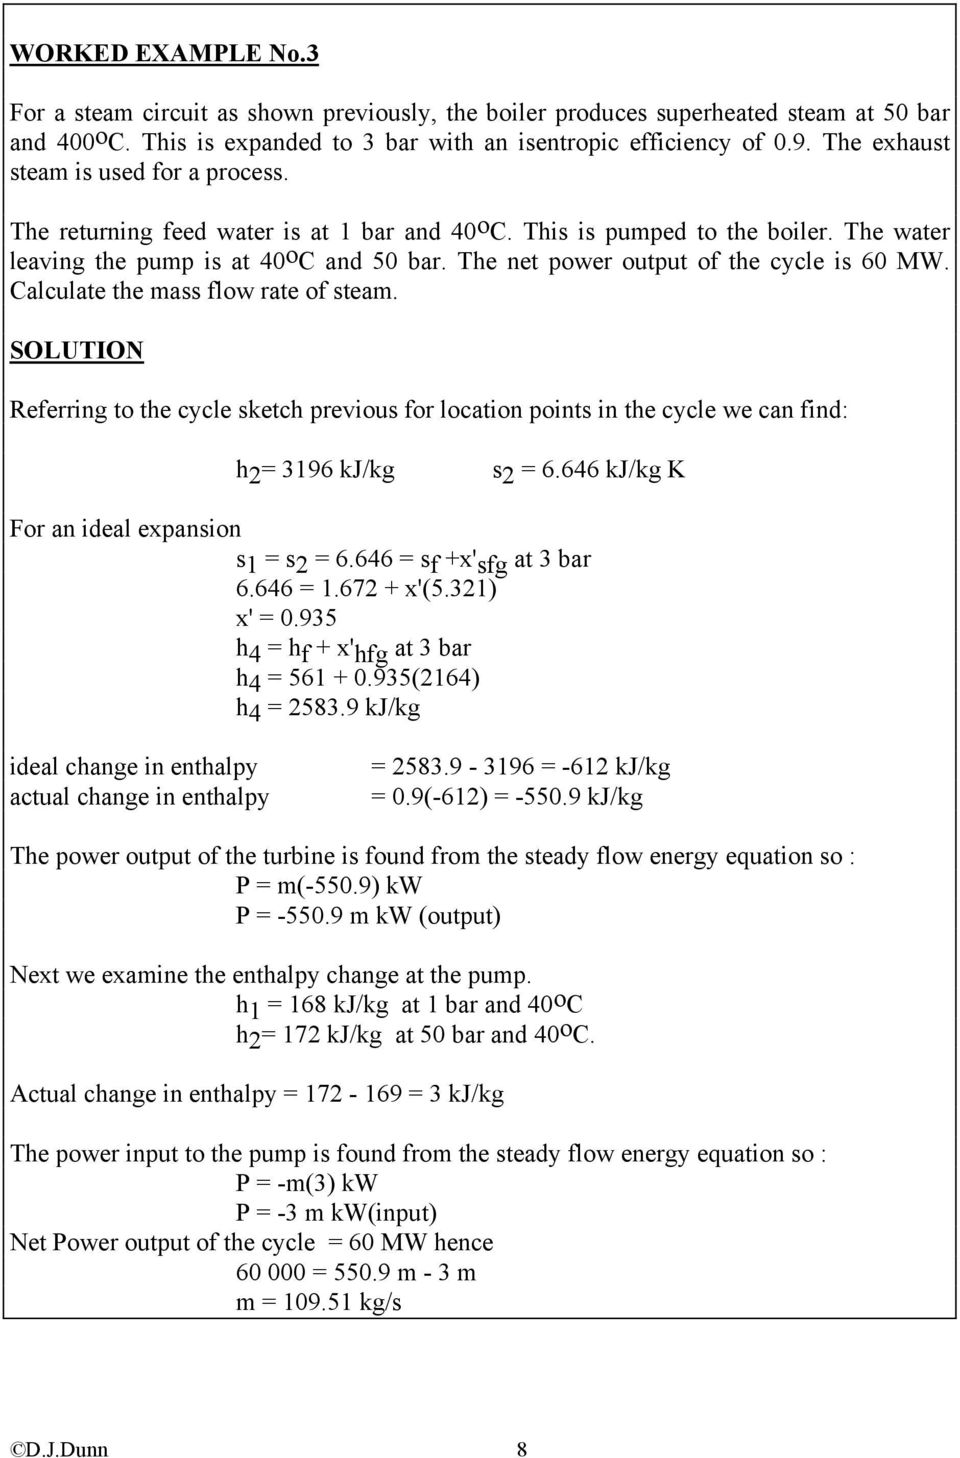 The net power output of the cycle is 60 MW. Calculate the mass flow rate of steam.